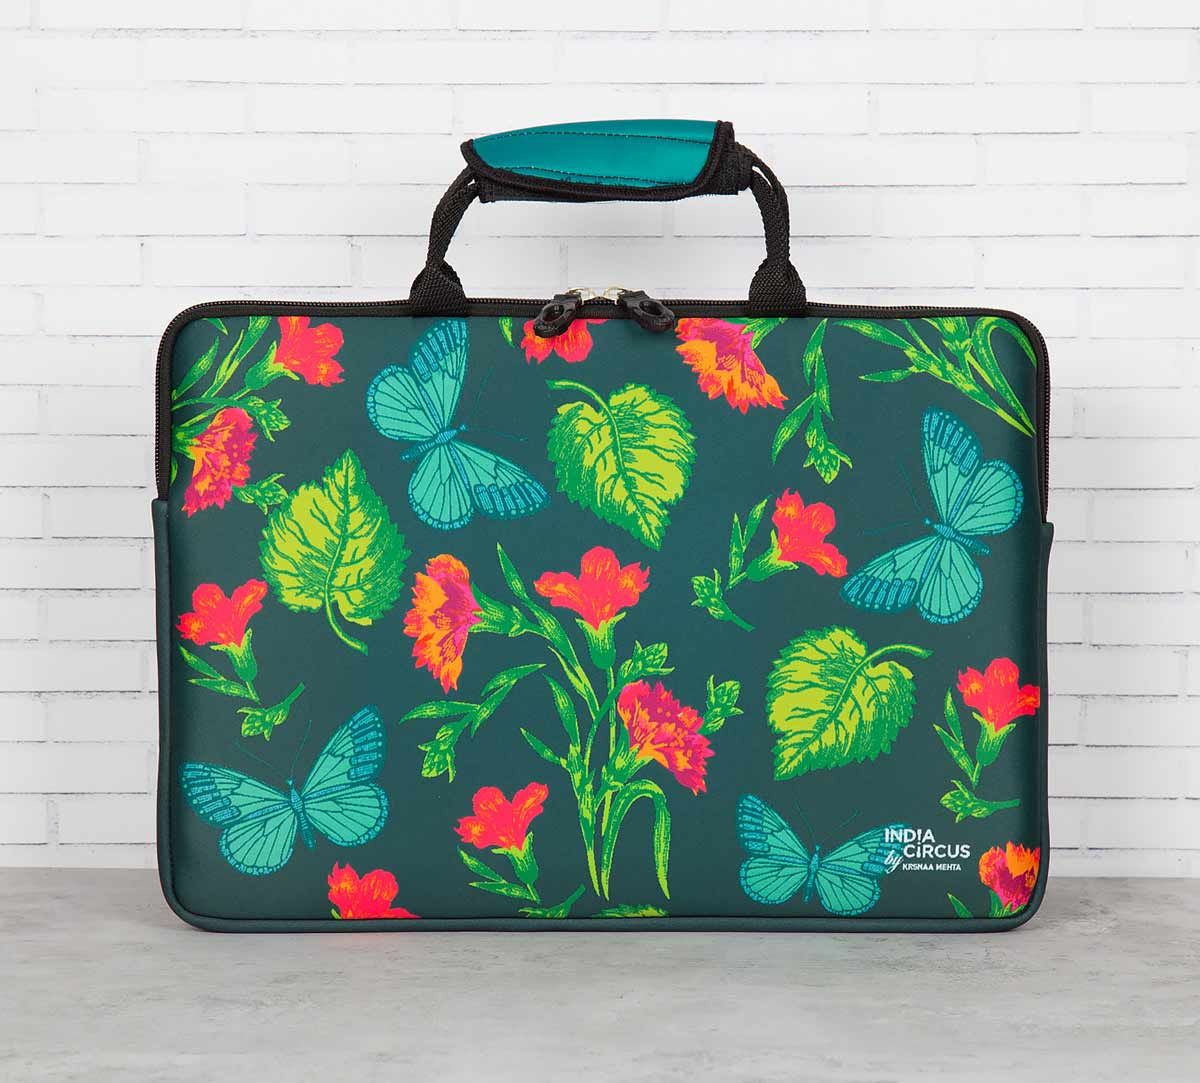 India Circus Fluttering Extravagance Laptop Sleeve and Bag